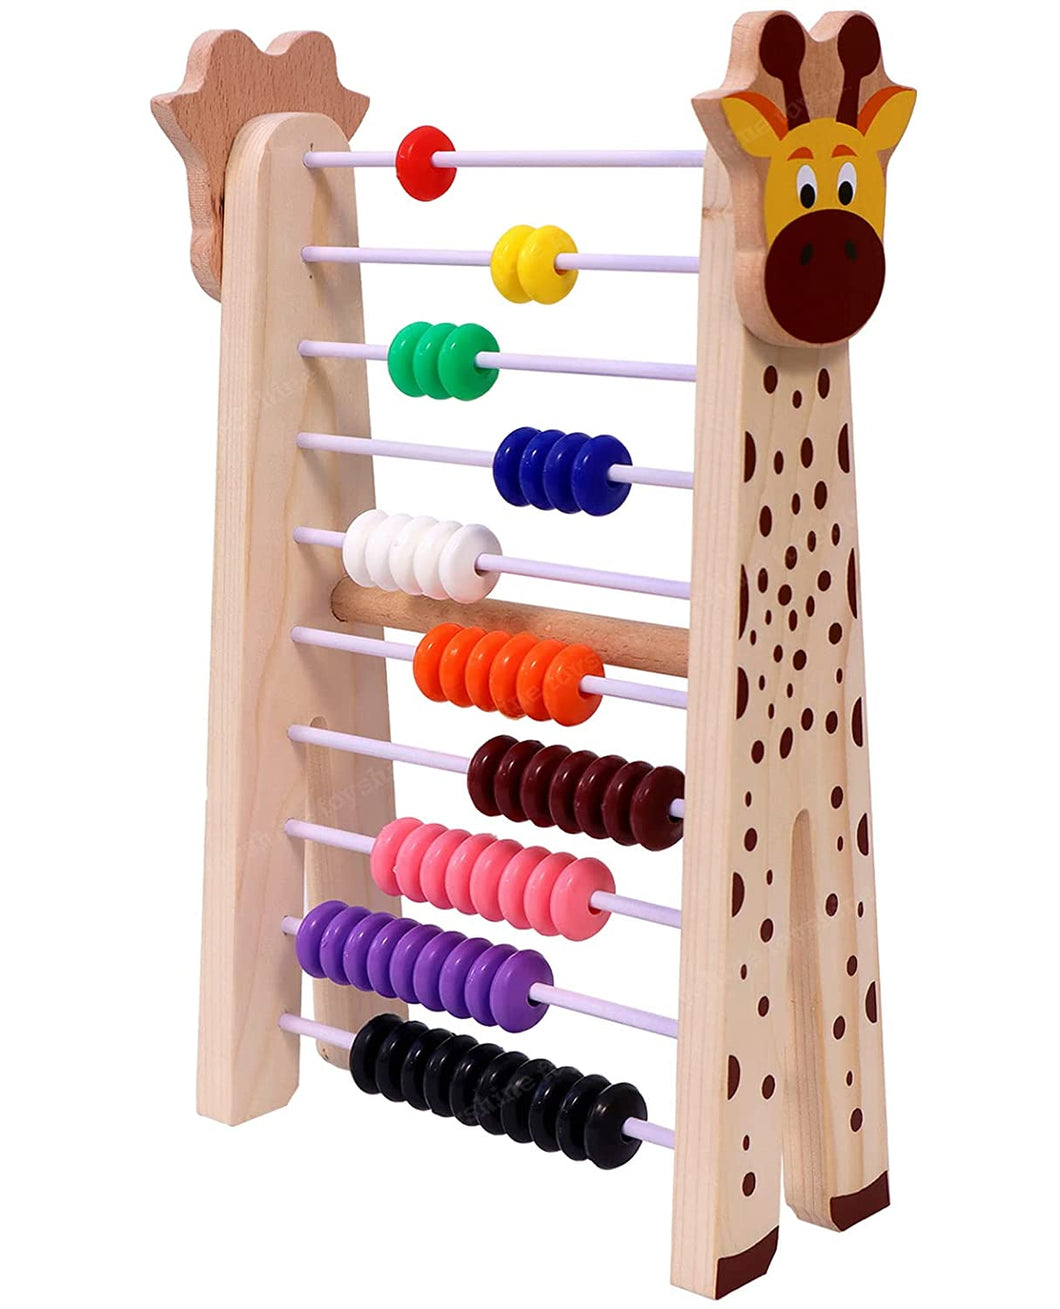 Toyshine Giraffe Wooden Abacus and Learning Play Center - Multi Color